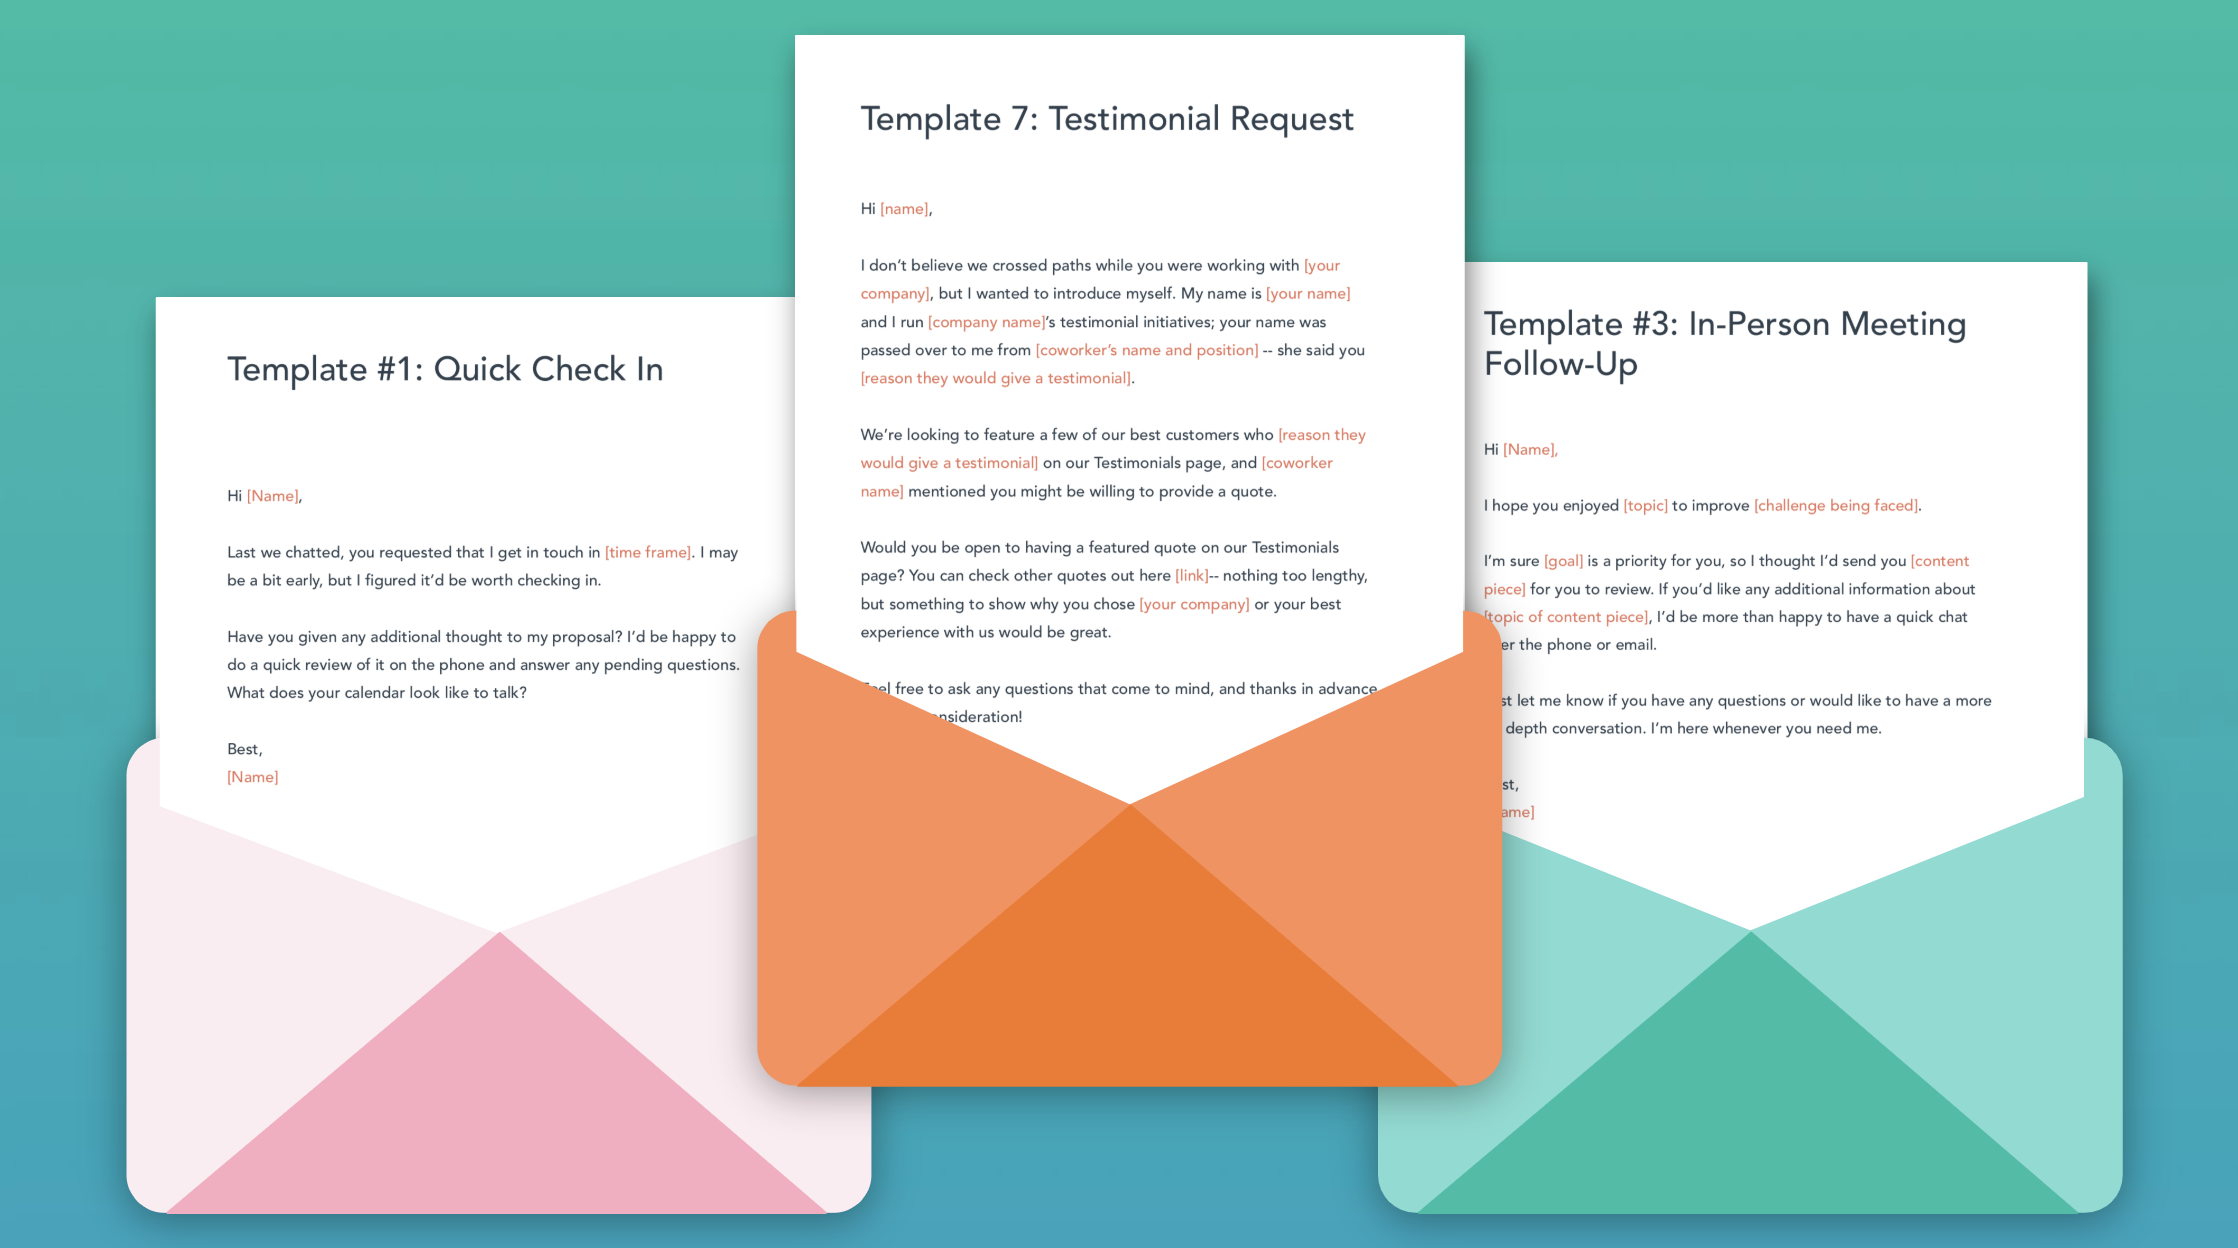 The Benefits of Customer Service Email Templates